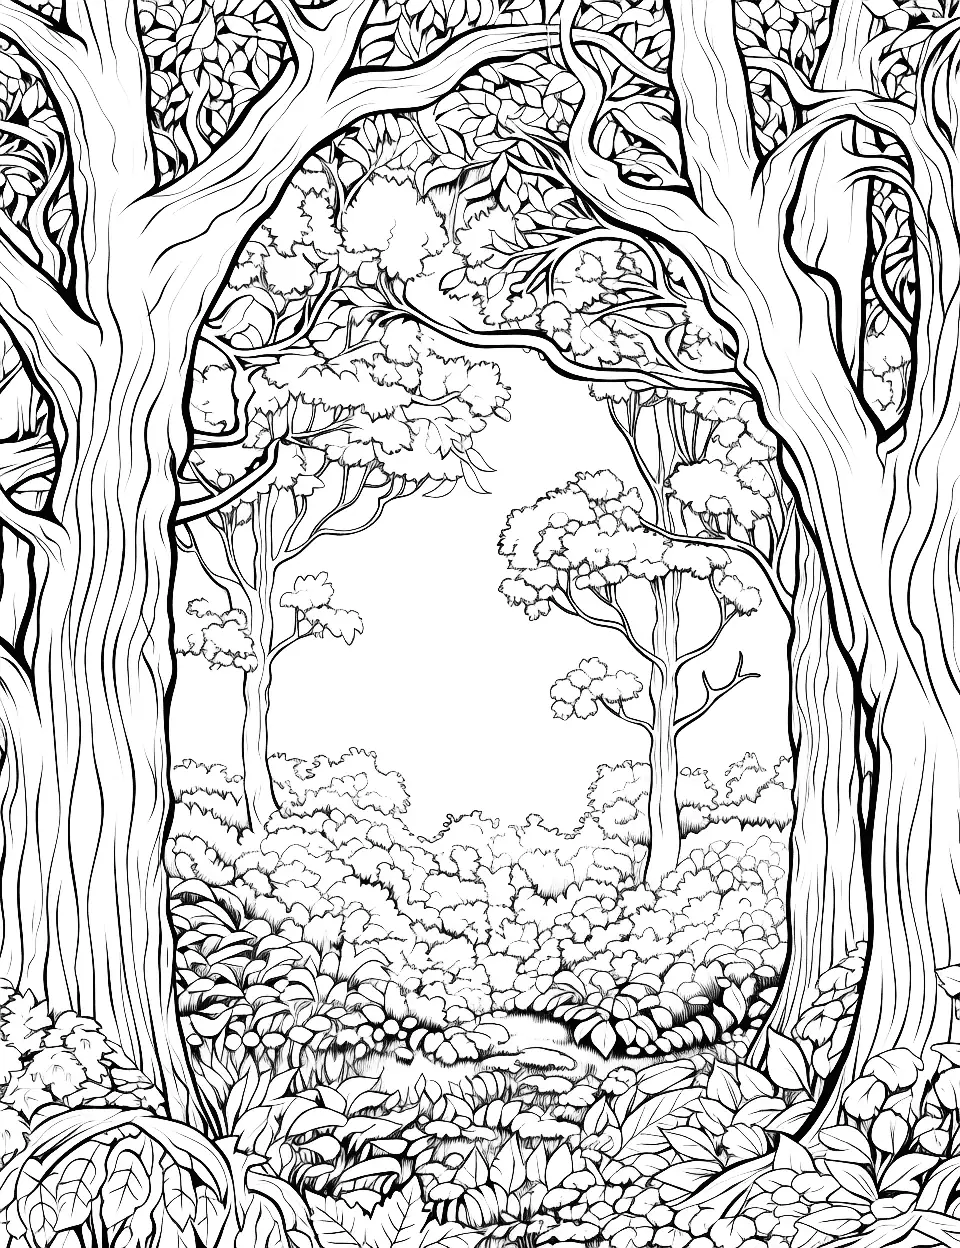 Enchanted Forest Canopy Adult Coloring Page - Overarching trees with light filtering through.